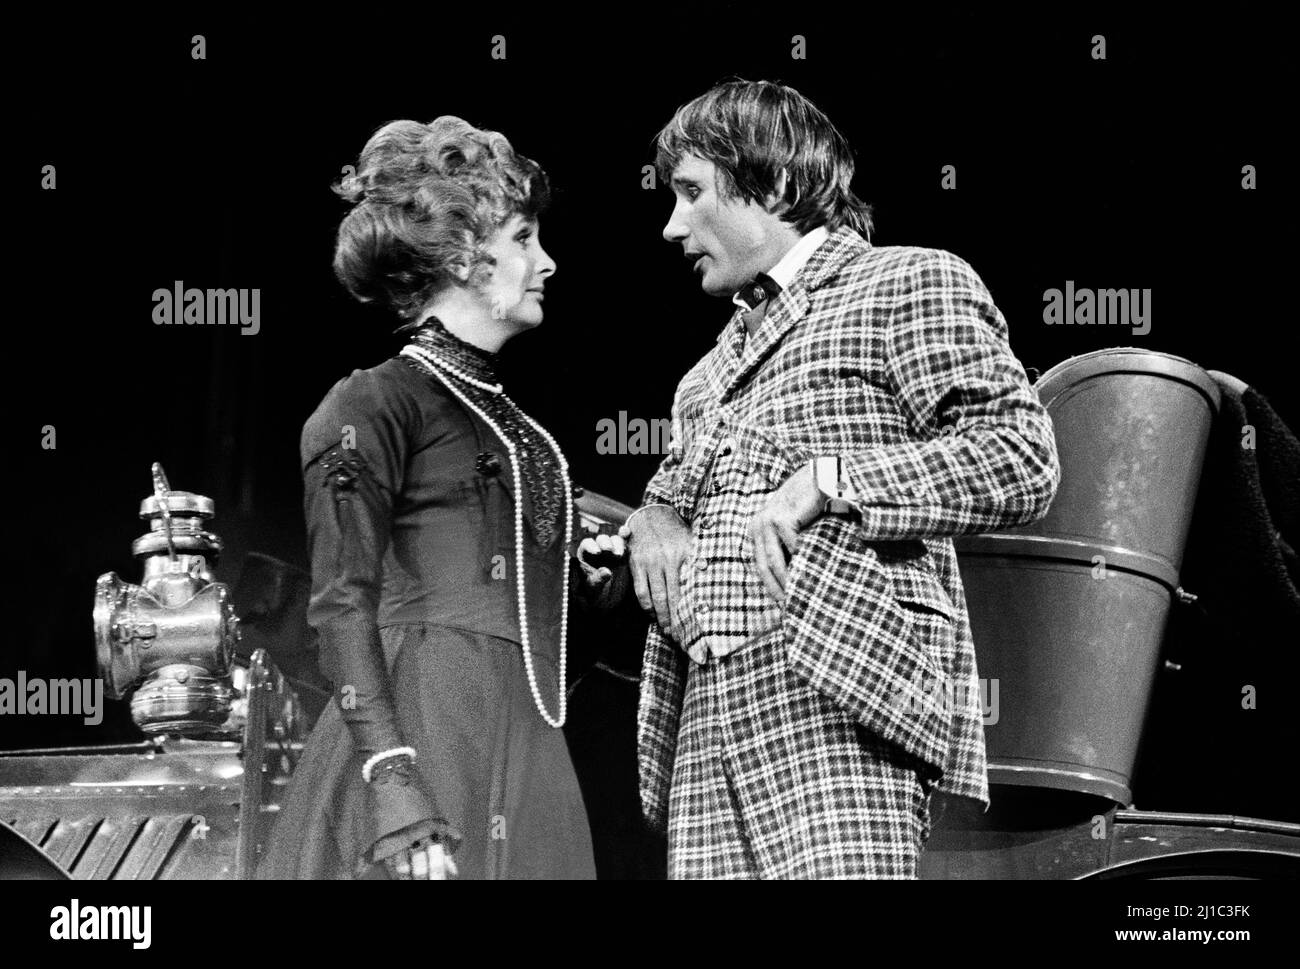 Millicent Martin (Ruth Tarp), Jim Dale (Denry Machin) in THE CARD at the Queen’s Theatre, London W1  24/07/1973  music & lyrics: Tony Hatch & Jackie Trent  book: Keith Waterhouse & Willis Hall  after the novel by Arnold Bennett  design: Malcolm Pride  musical staging & choreography: Gillian Lynne  director: Val May Stock Photo